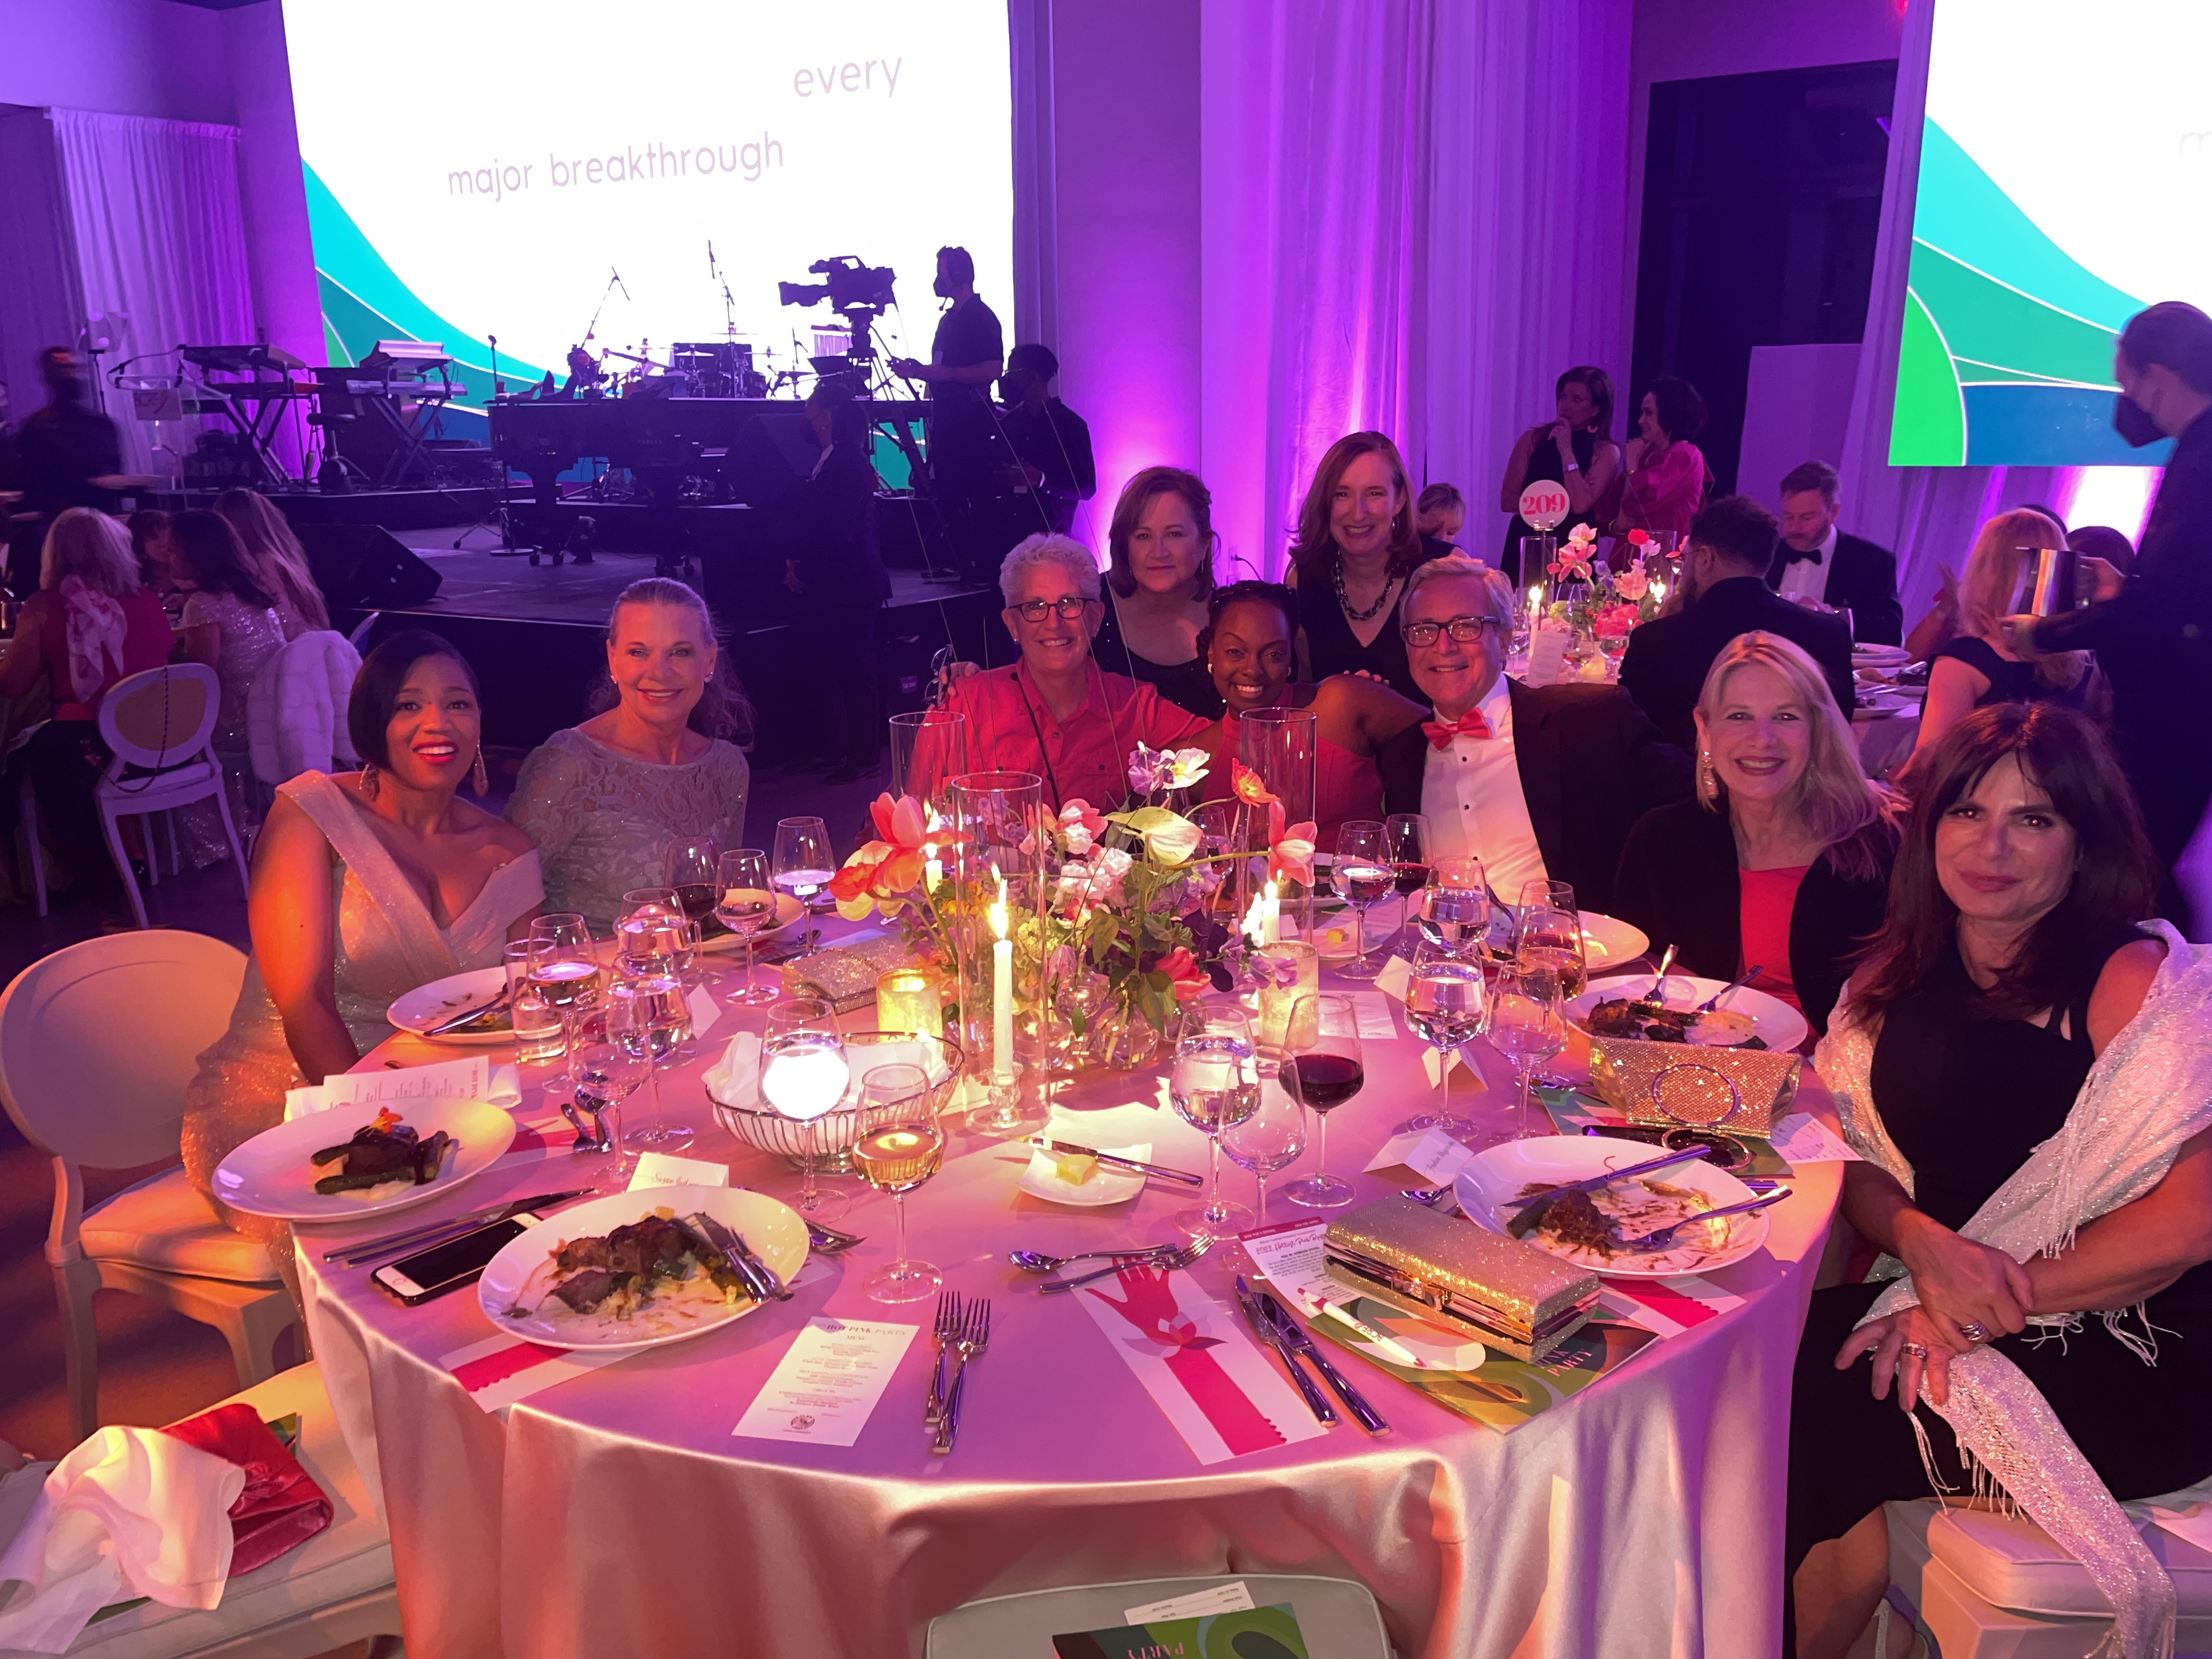 Employees who raised the most for the cause this year were honored Tuesday at BCRF's Hot Pink Party in New York City and presented the donation to BCRF alongside Delta leaders.